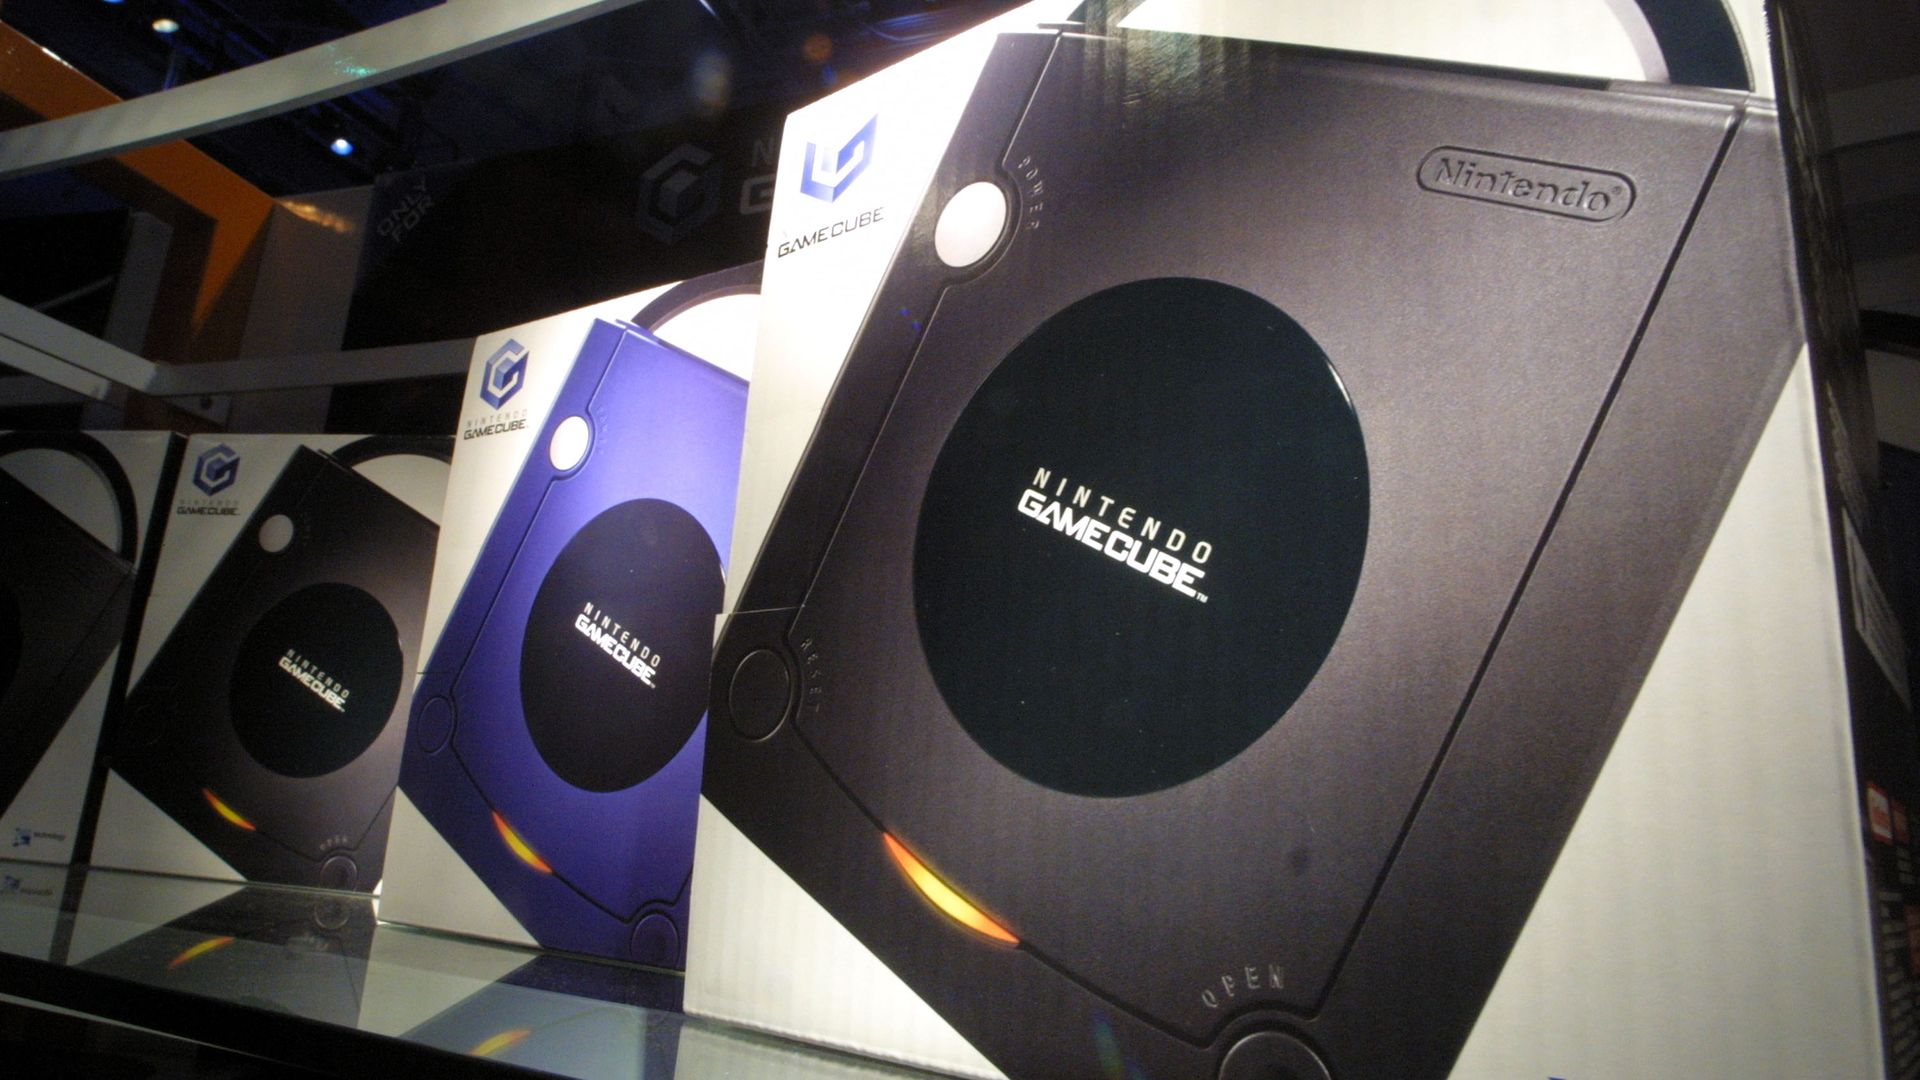 Photo of boxes of GameCube consoles, each sporting a signature handle